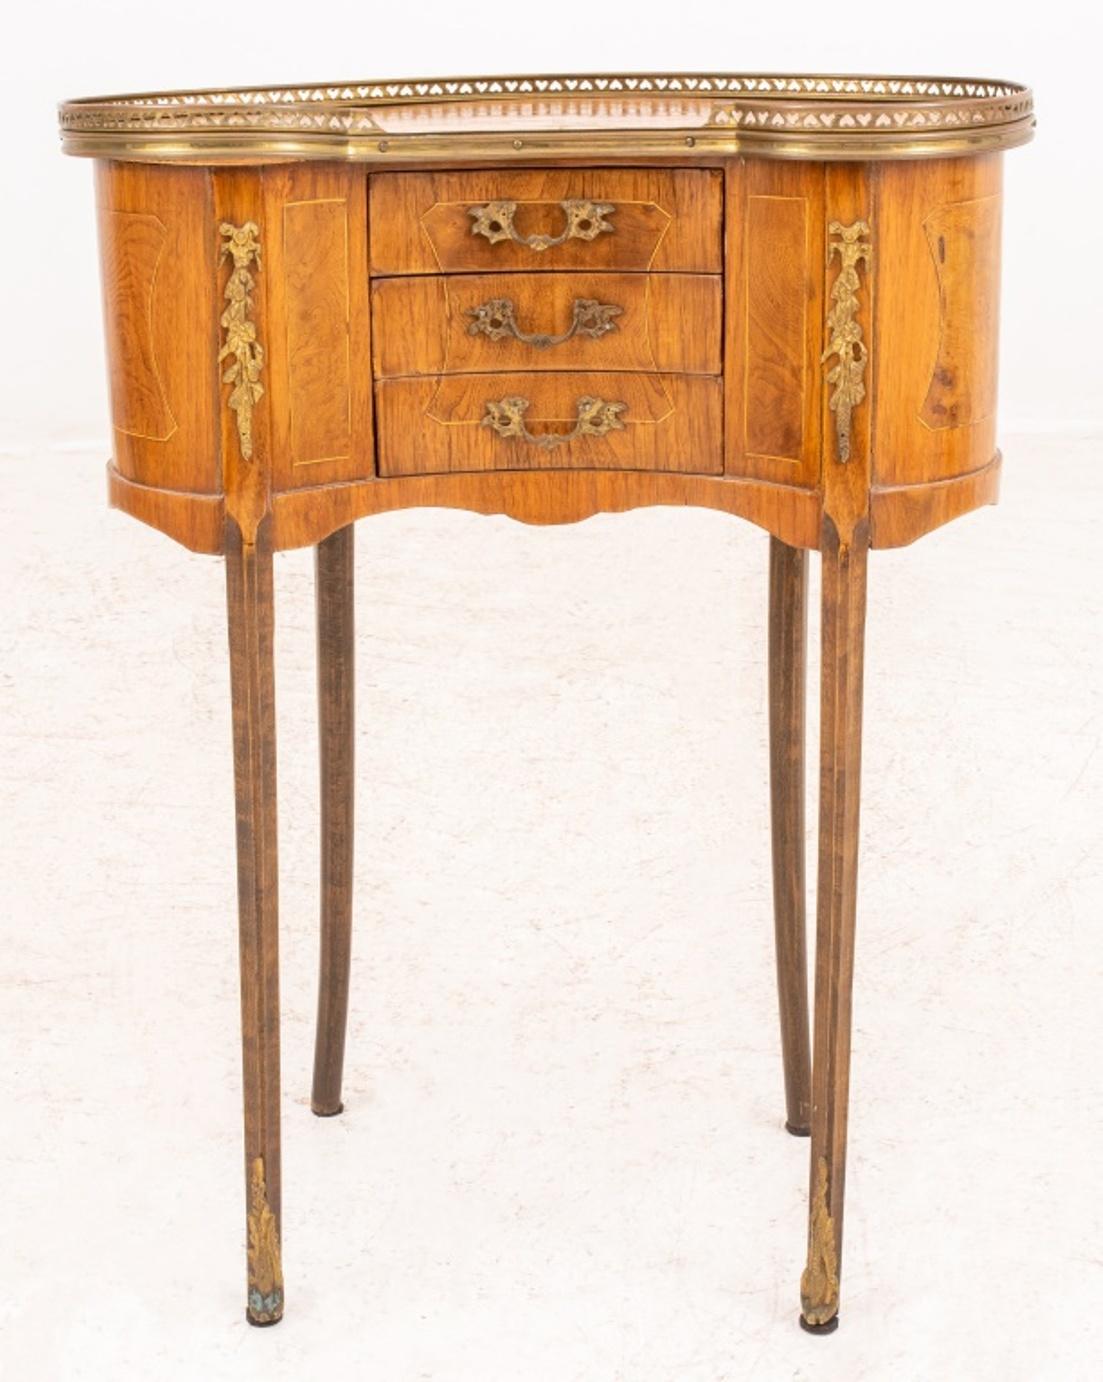 French Louis XV style marquetry bean side table with pierced repeating heart design throughout bronze gallery at the tabletop, raised on tapered cabriole legs with gilt metal mounts, three drawers with gilt metal handles.

Dimensions: 28.5